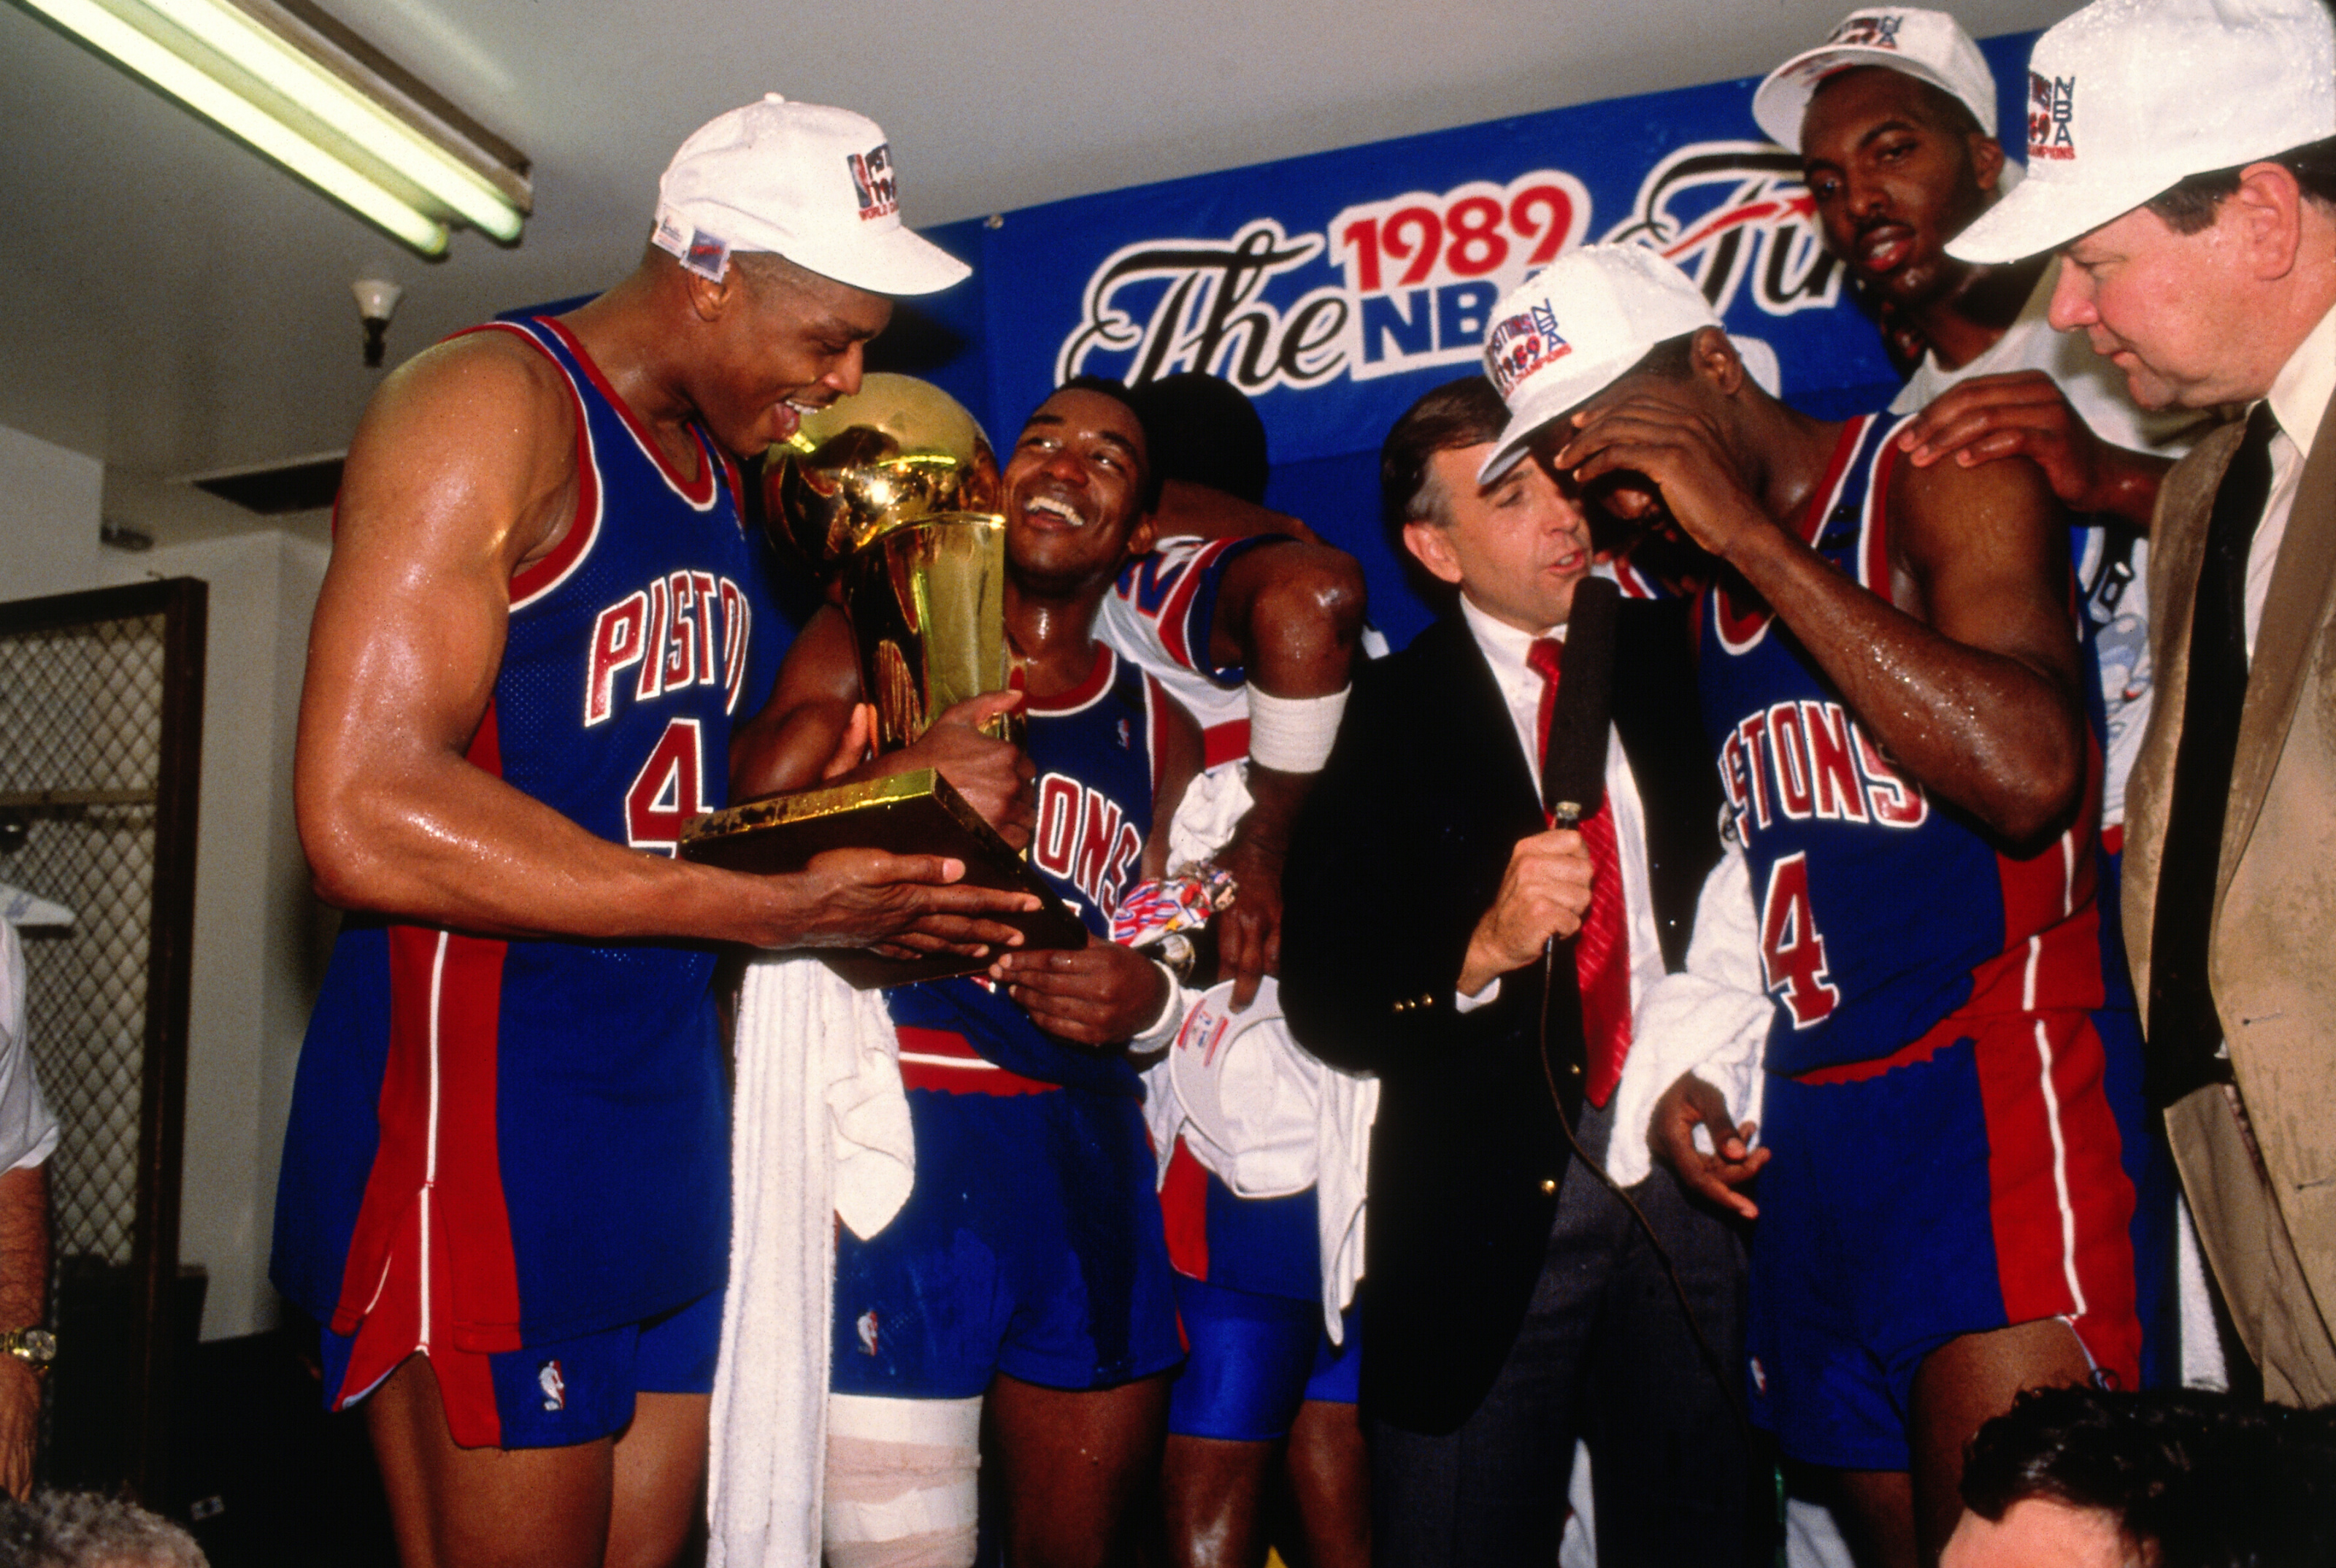 DETROIT PISTONS TO RECOGNIZE CHAMPIONSHIP ANNIVERSARIES IN 2019